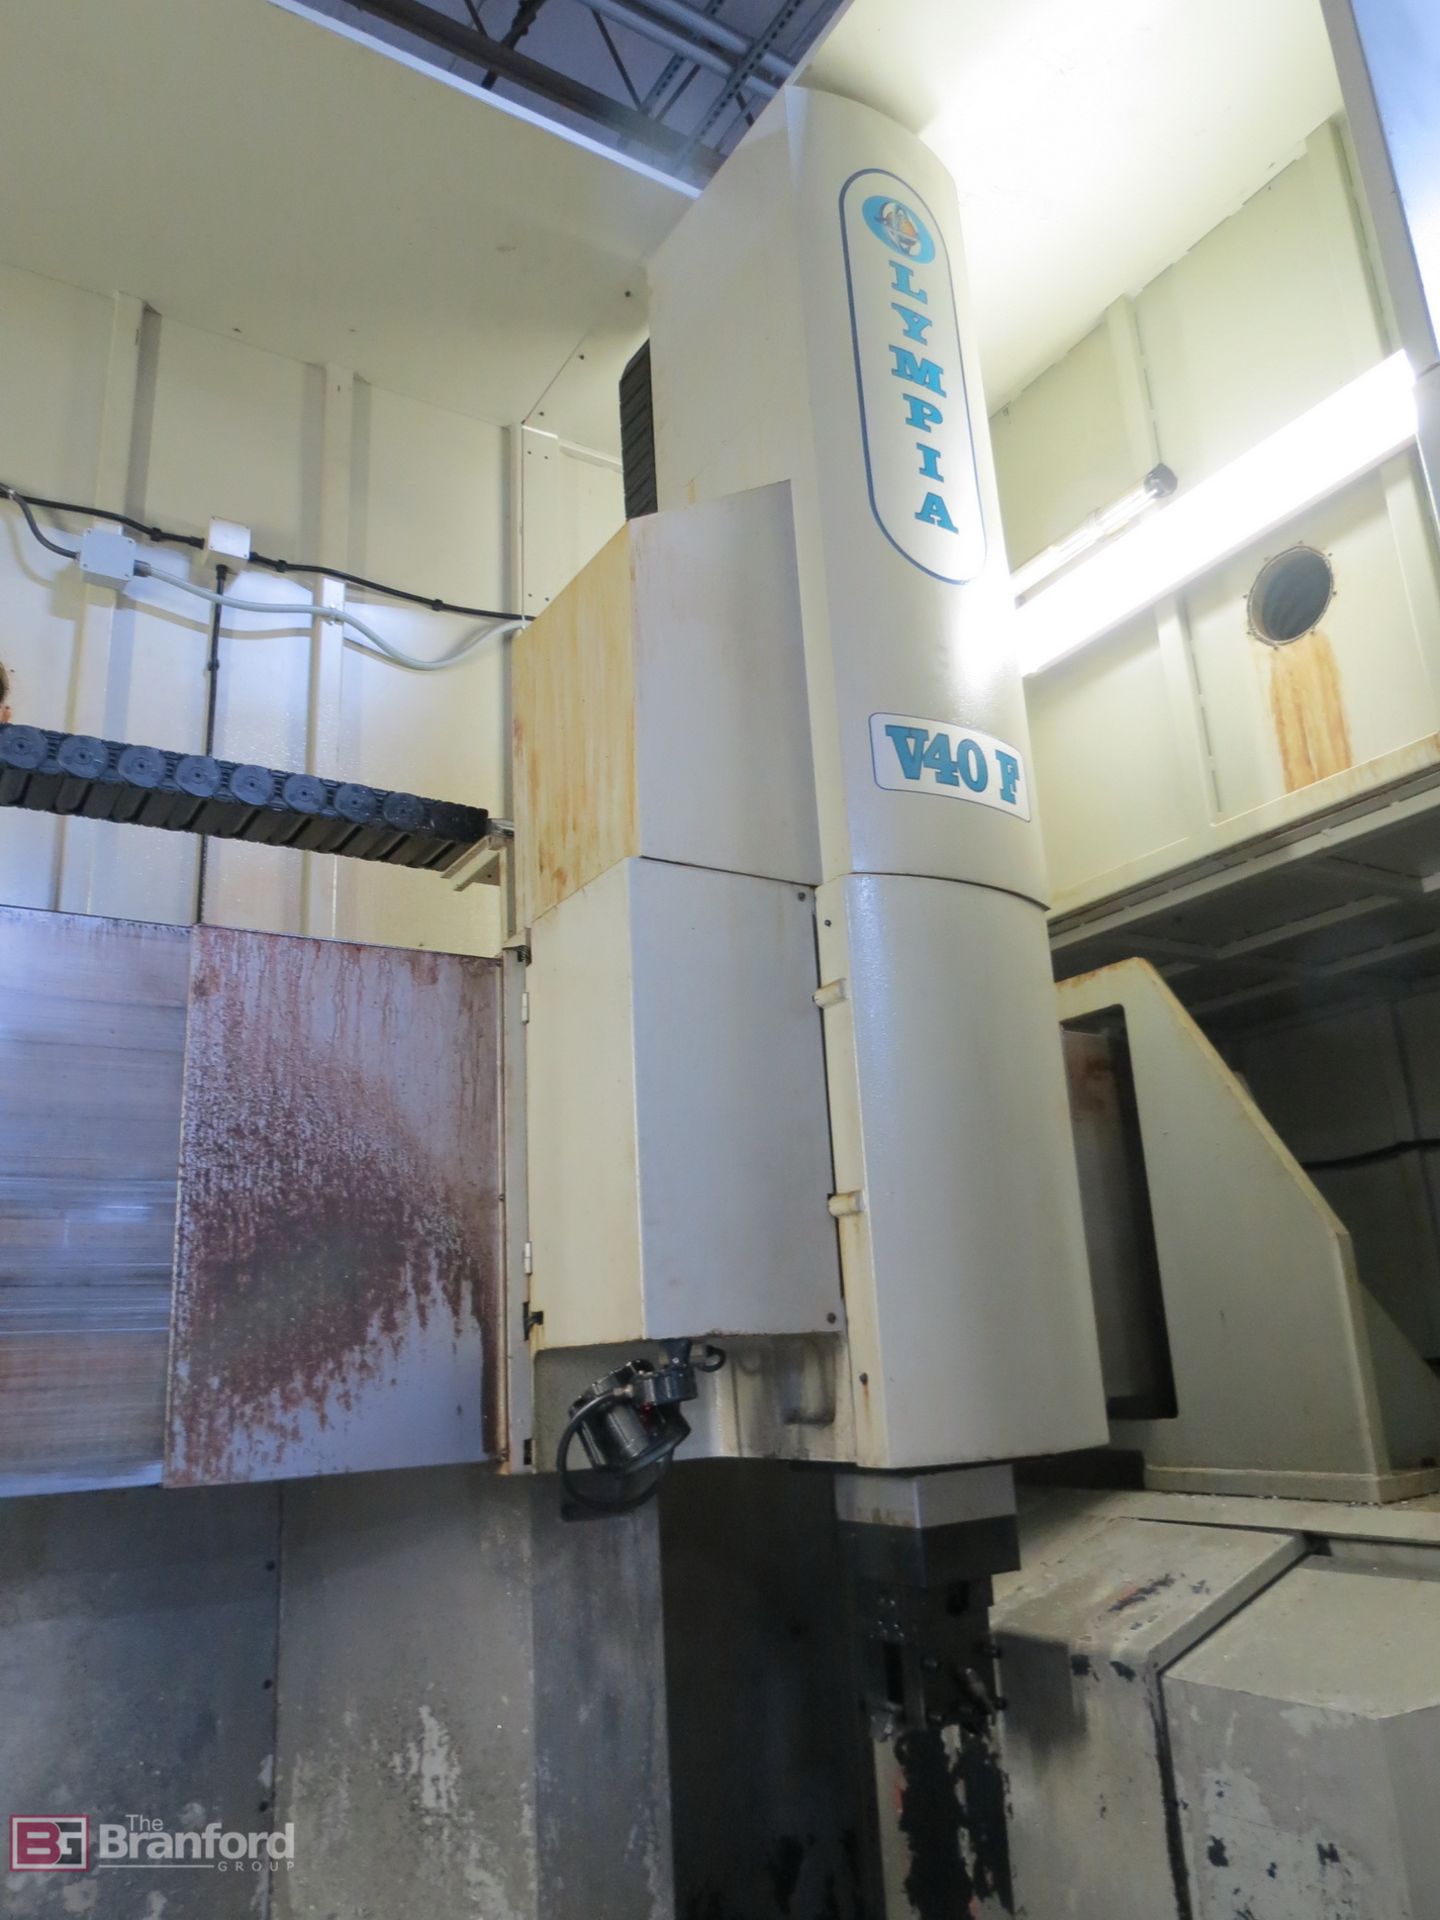 Olympia V40-PF CNC Vertical Turning Center - Image 5 of 16